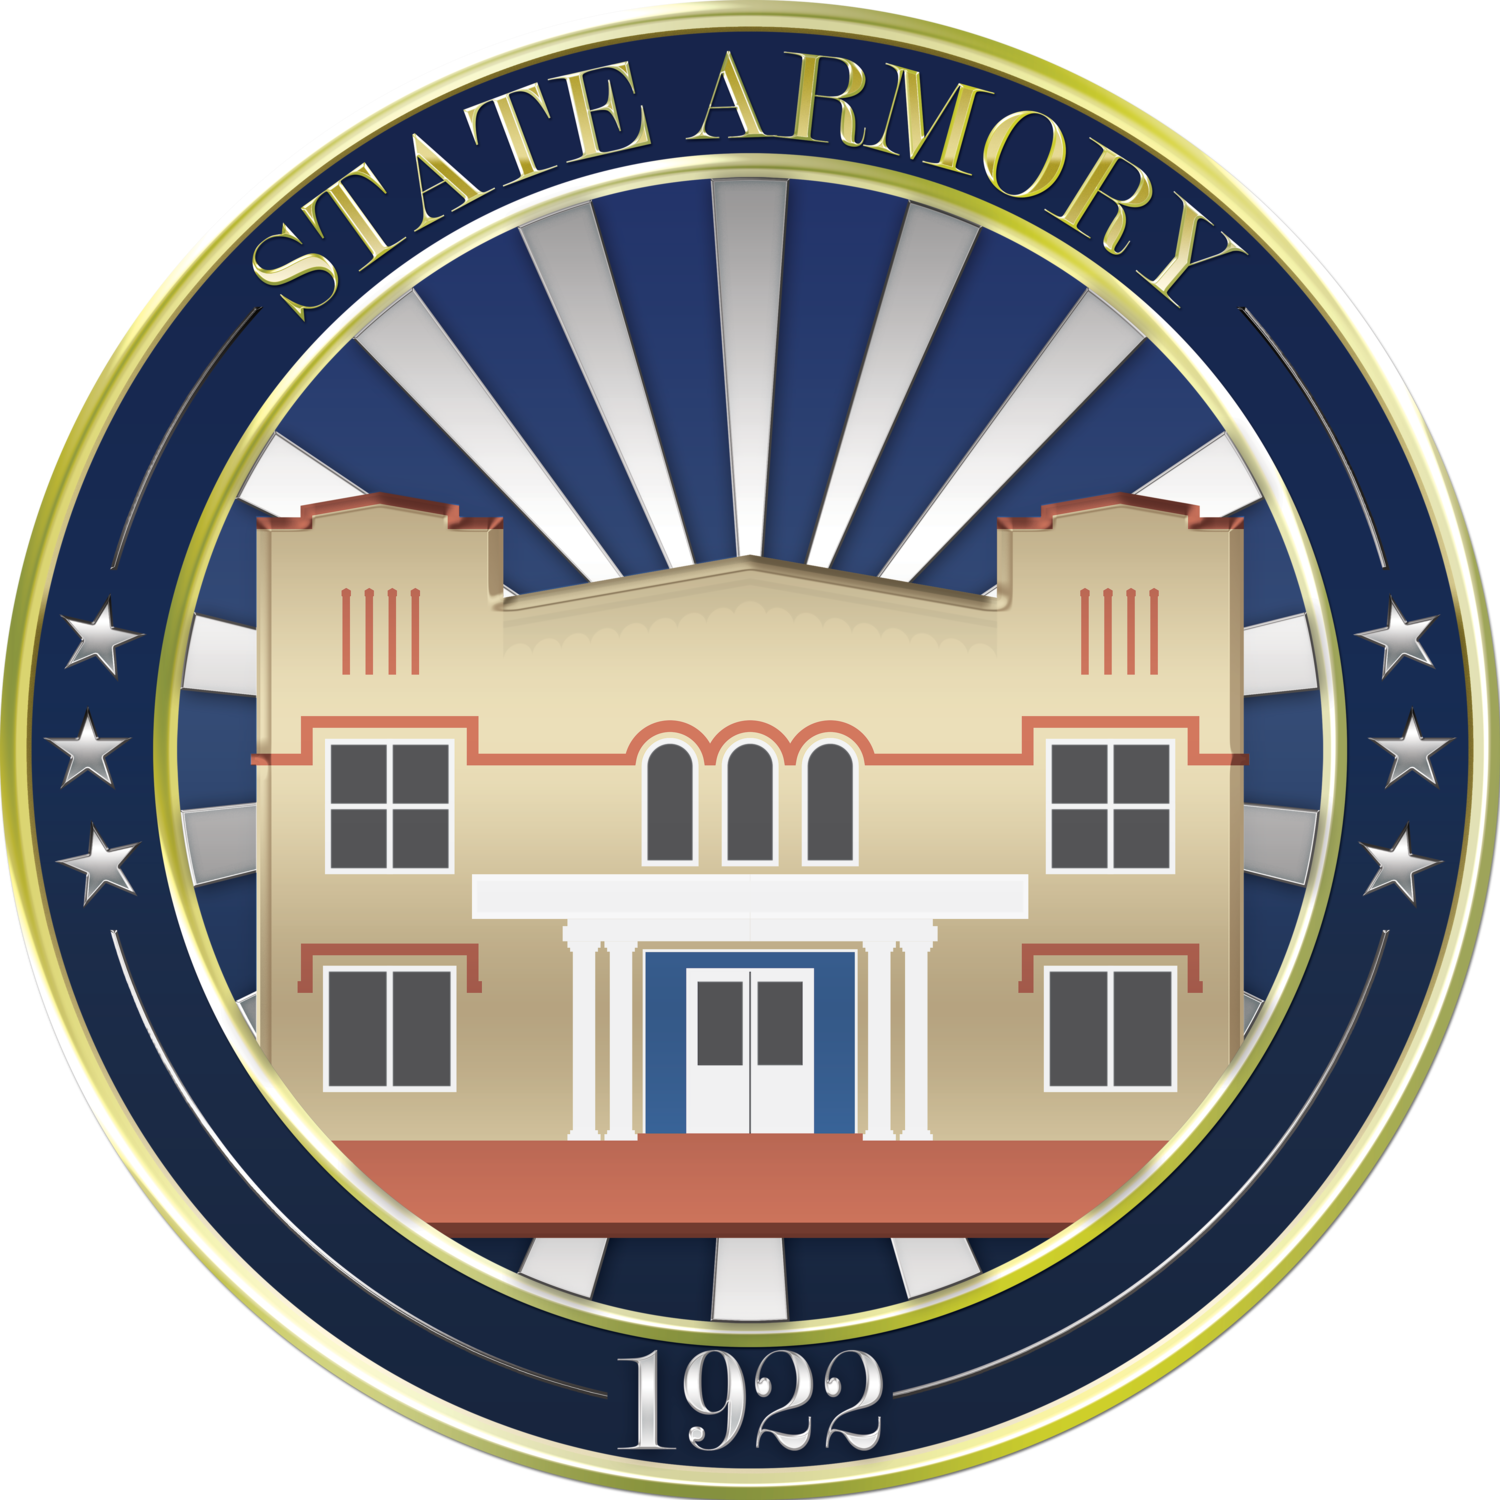 State Armory Event Center